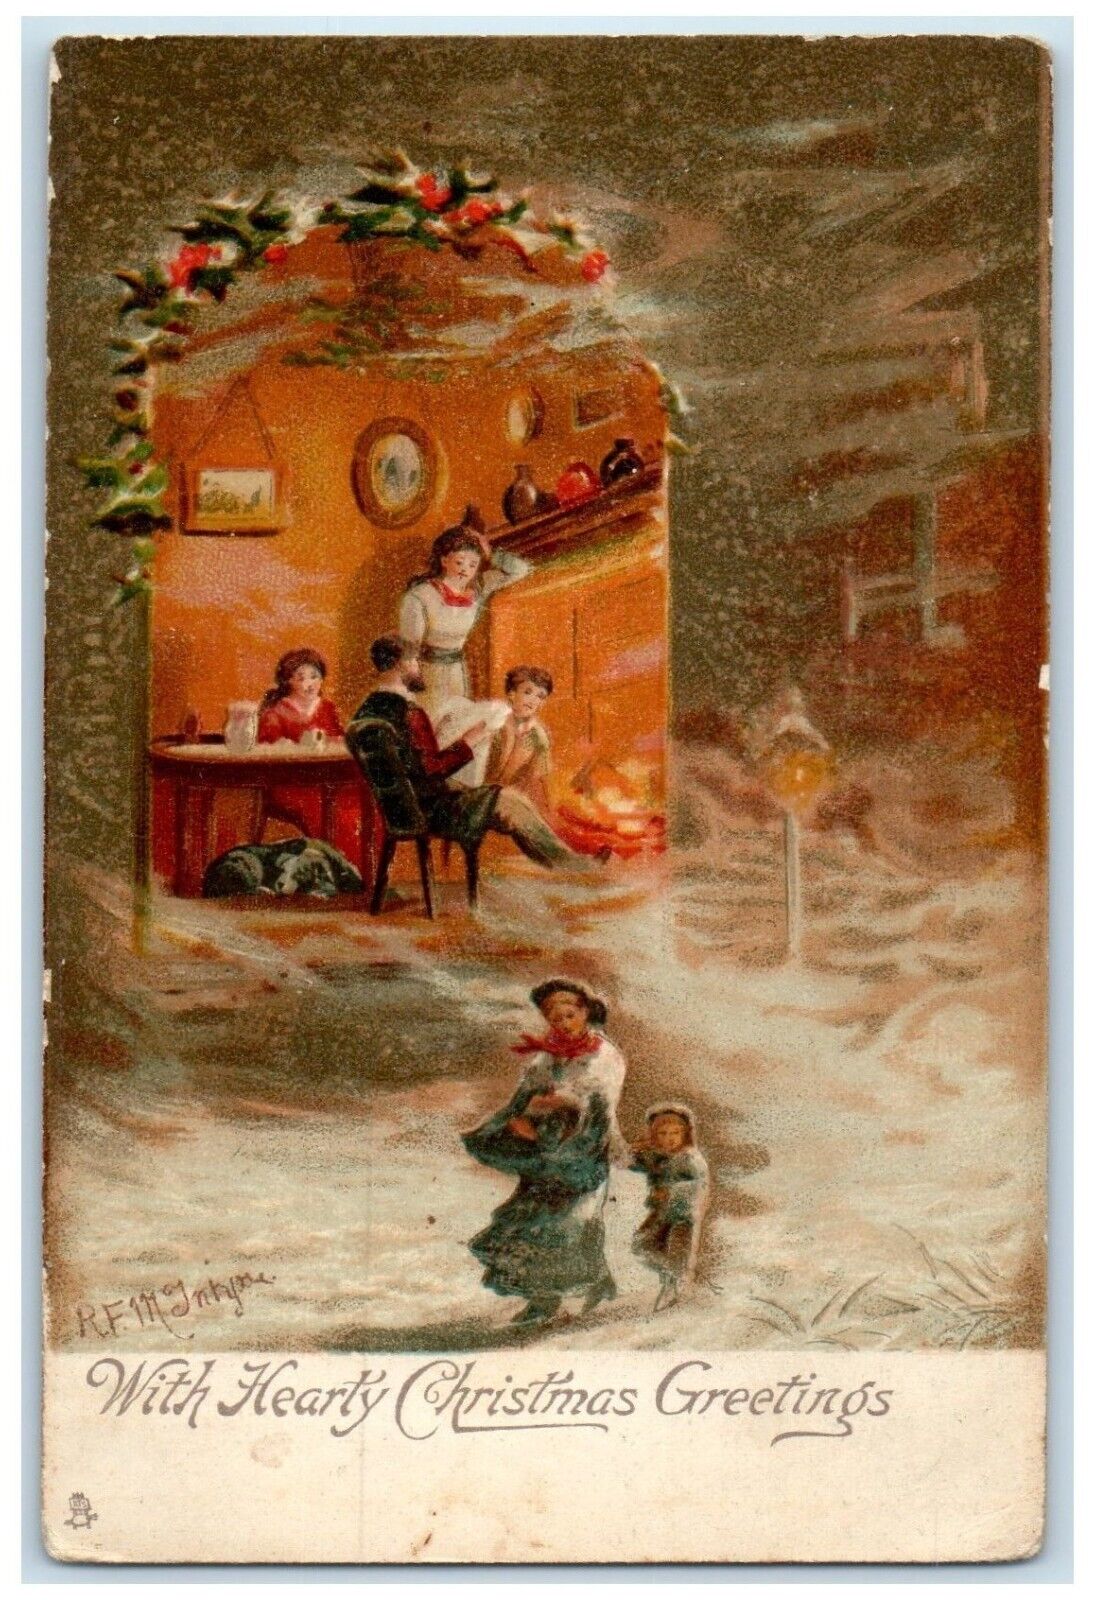 c1905 Christmas Greetings Family Fireplace Tuck's Posted Antique Postcard